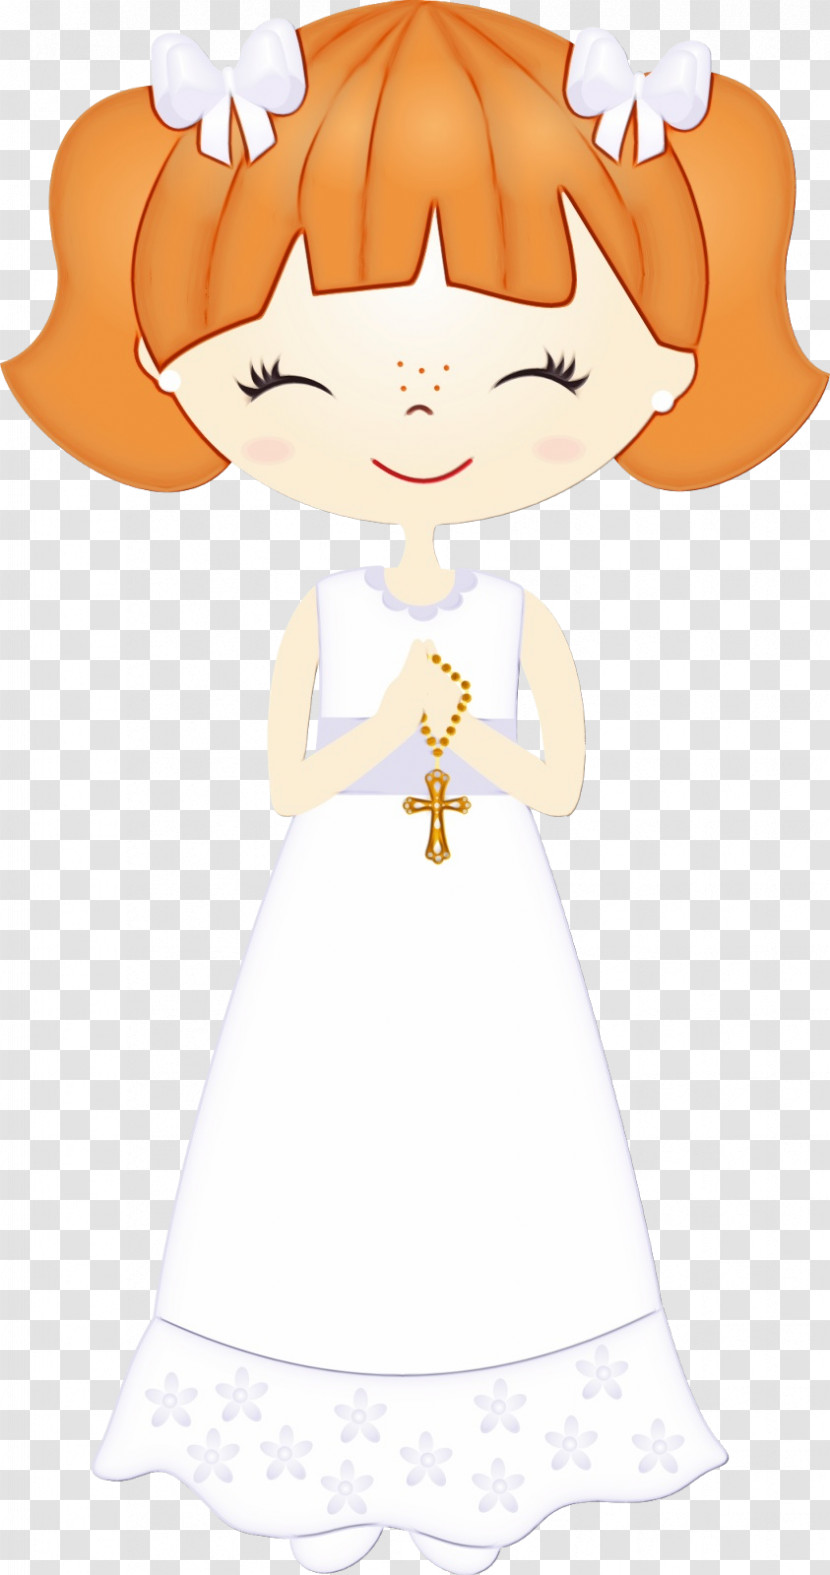 White Cartoon Angel Style Transparent PNG